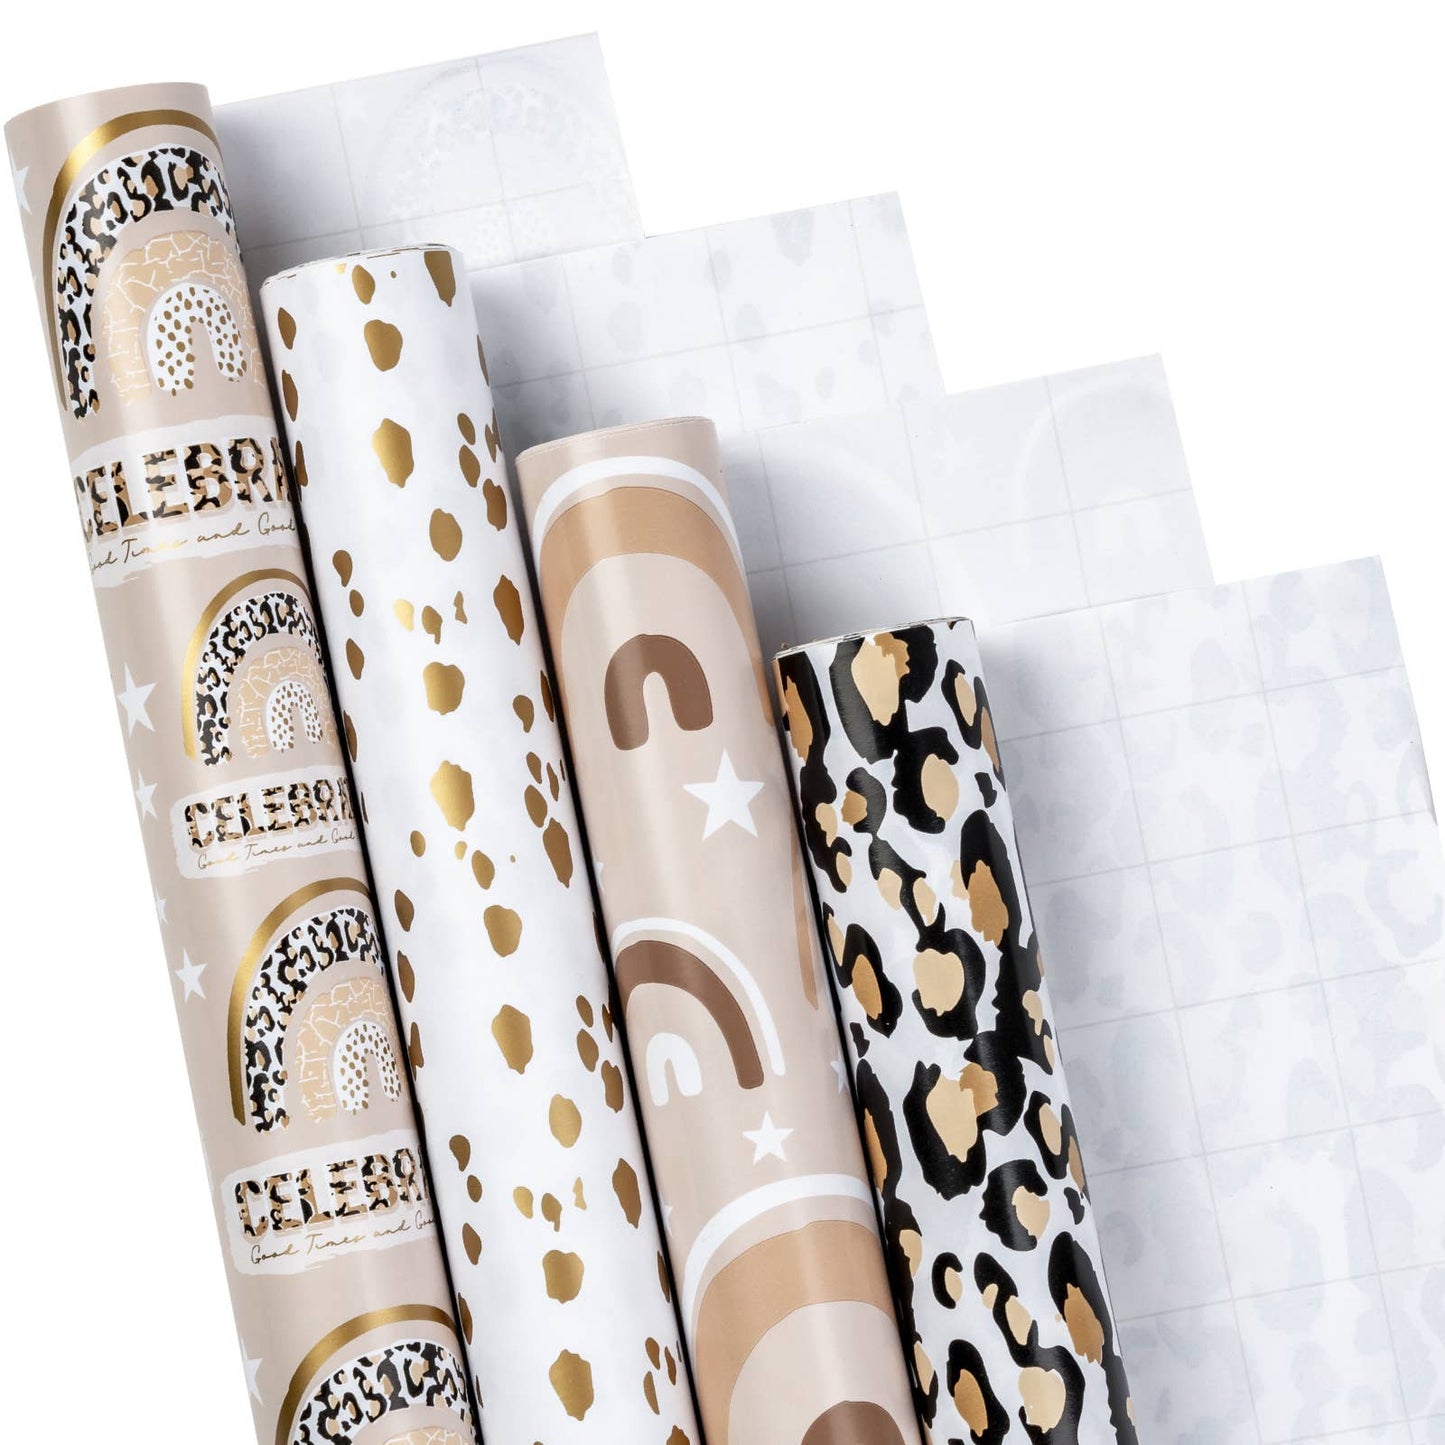 40 inch Wrapping Paper Jumbo Roll - Leopard series -4 Rolls